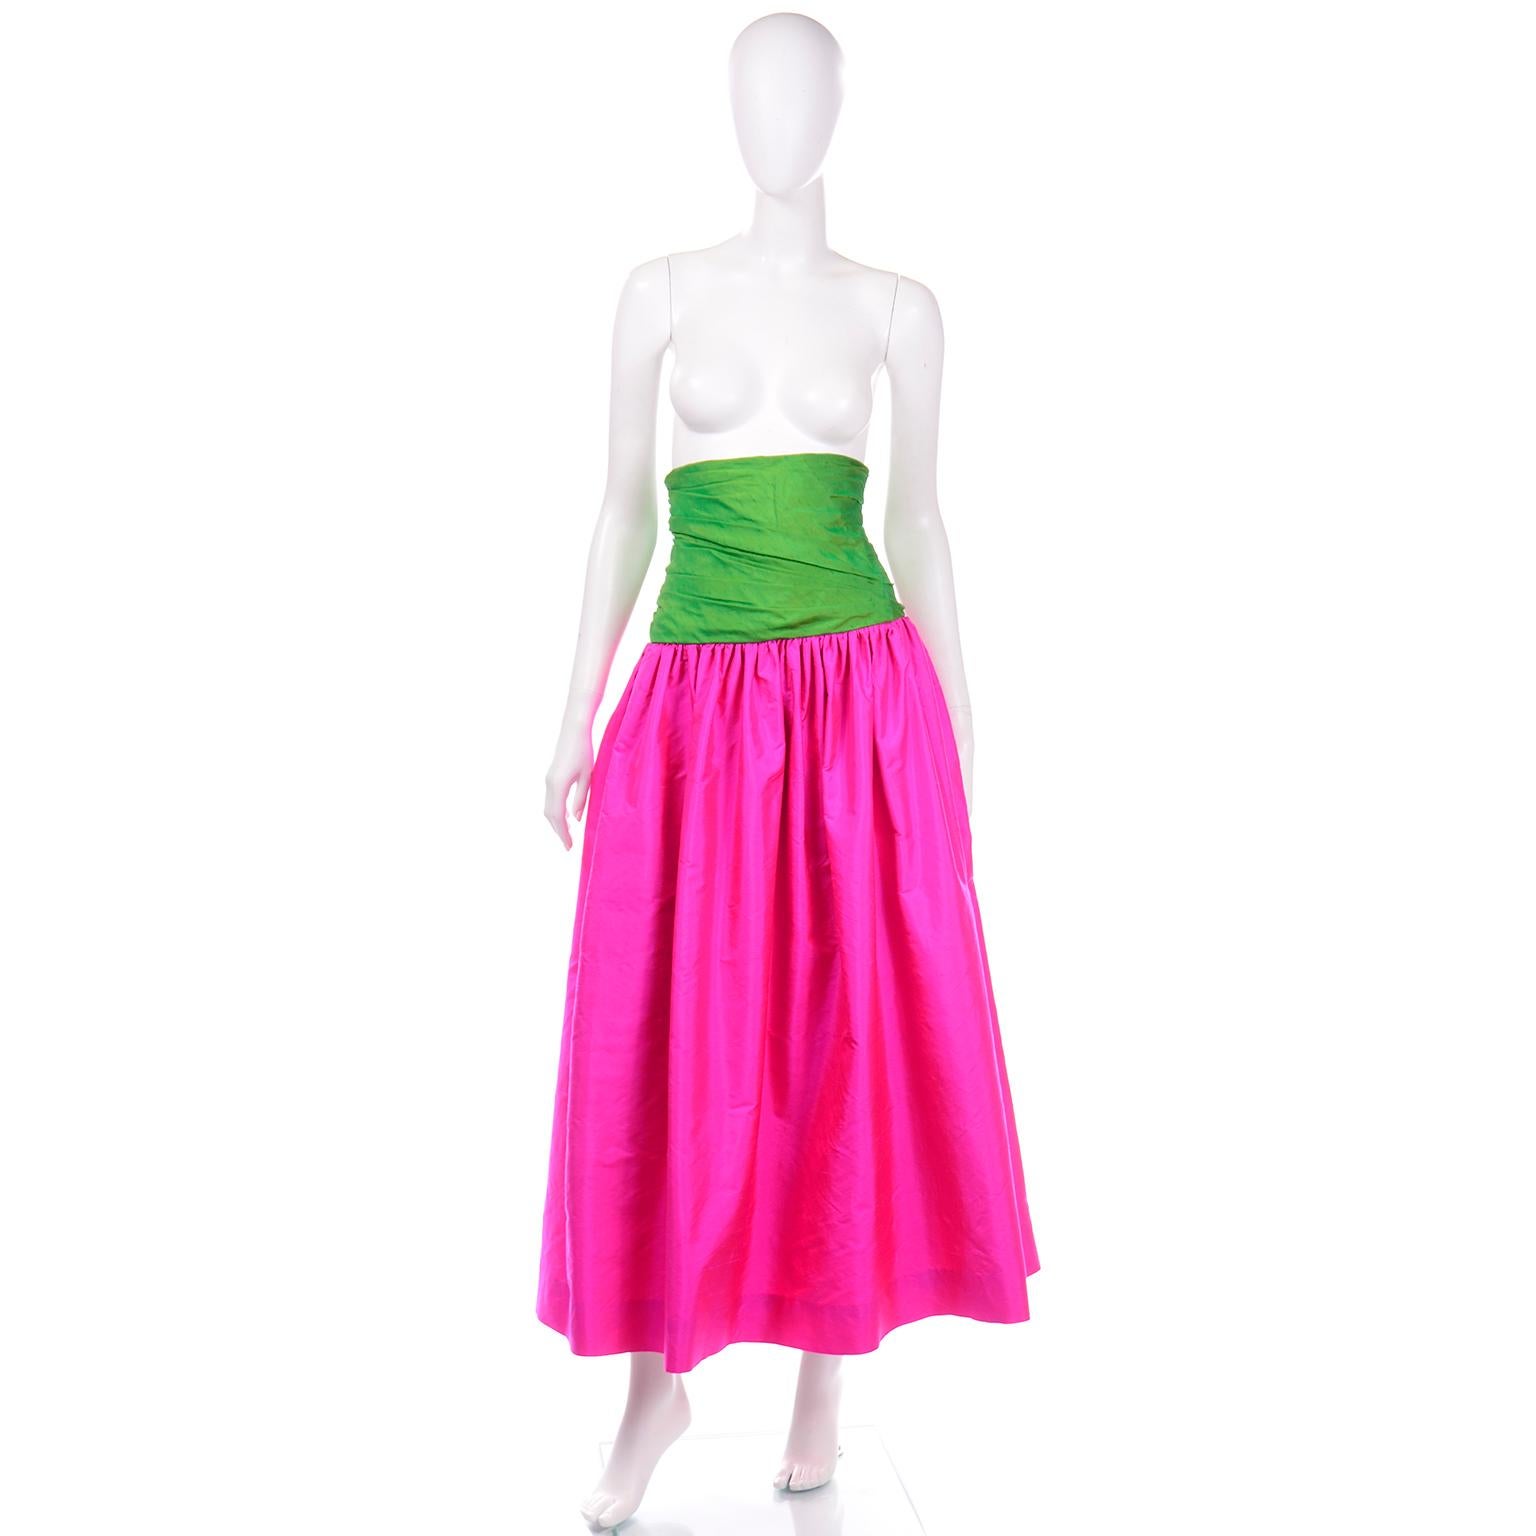 This is a really gorgeous bright vintage color block 1980's full length silk skirt with a wide bright green gathered extra wide waistband and a long hot pink skirt. This vintage evening skirt is gathered at the end of the waistband, which gives a